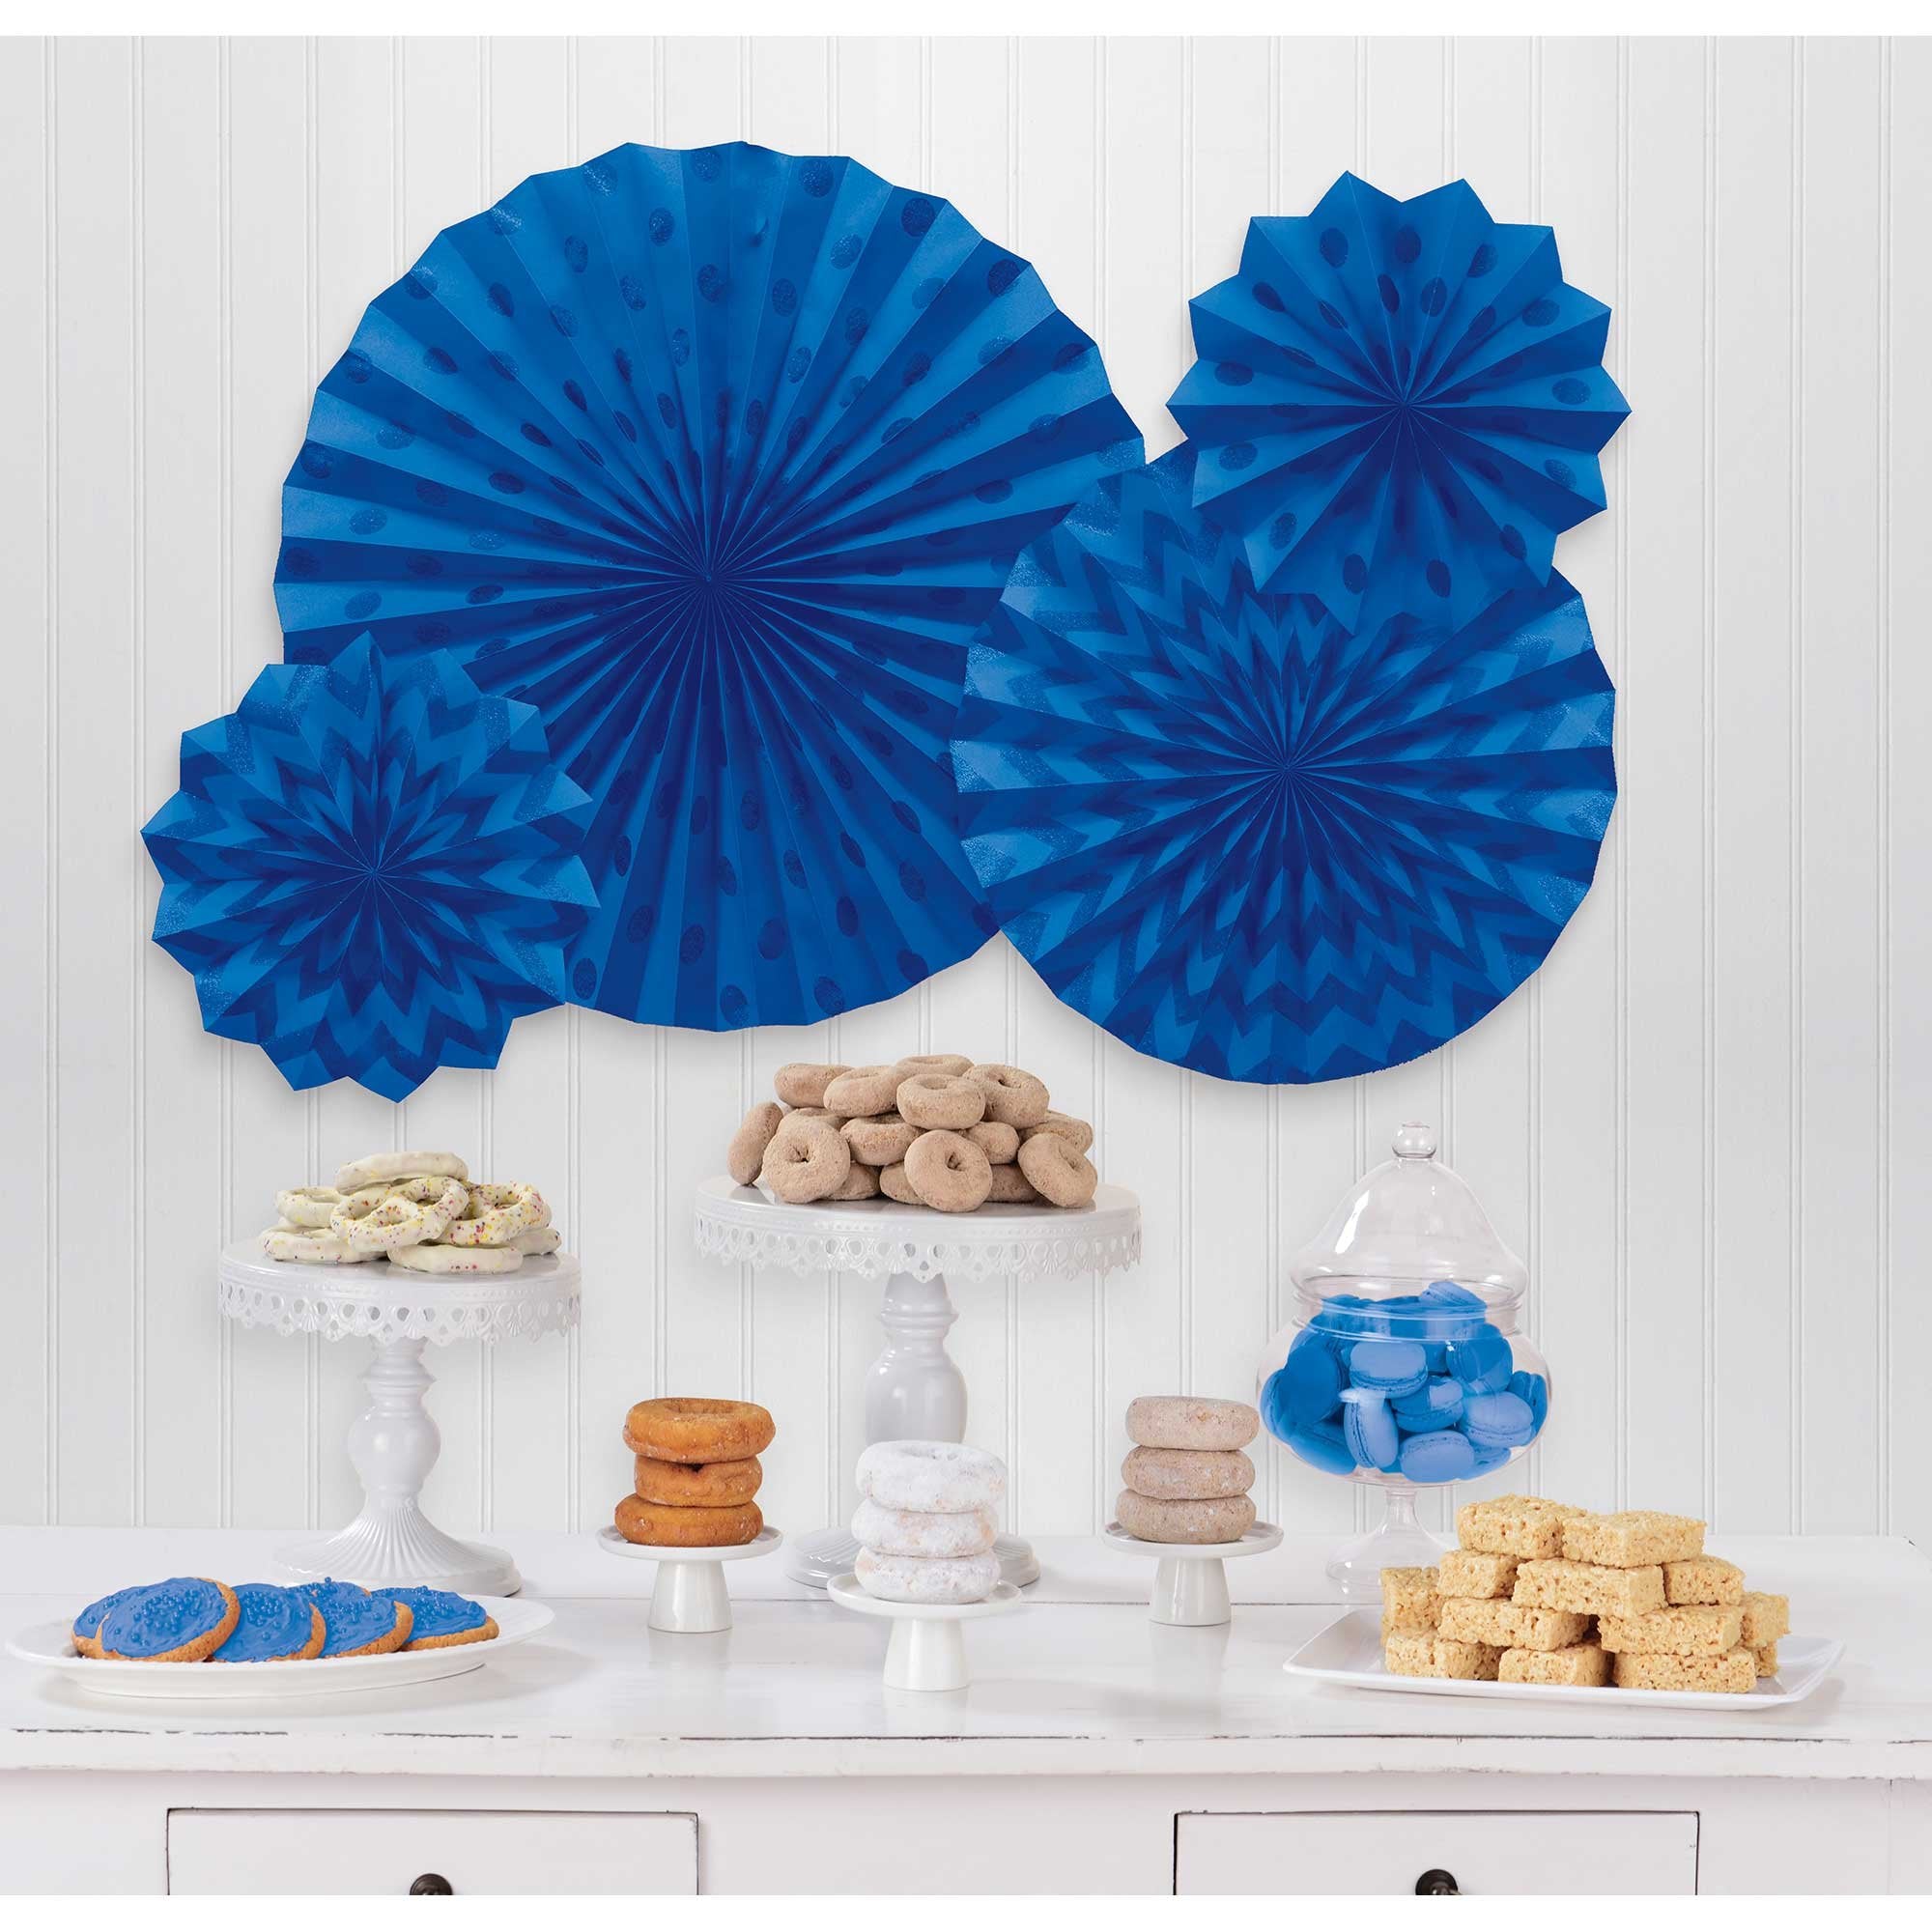 Party Empress' Blue collection infuses any celebration with elegance and tranquility, featuring a versatile range of blue-themed items